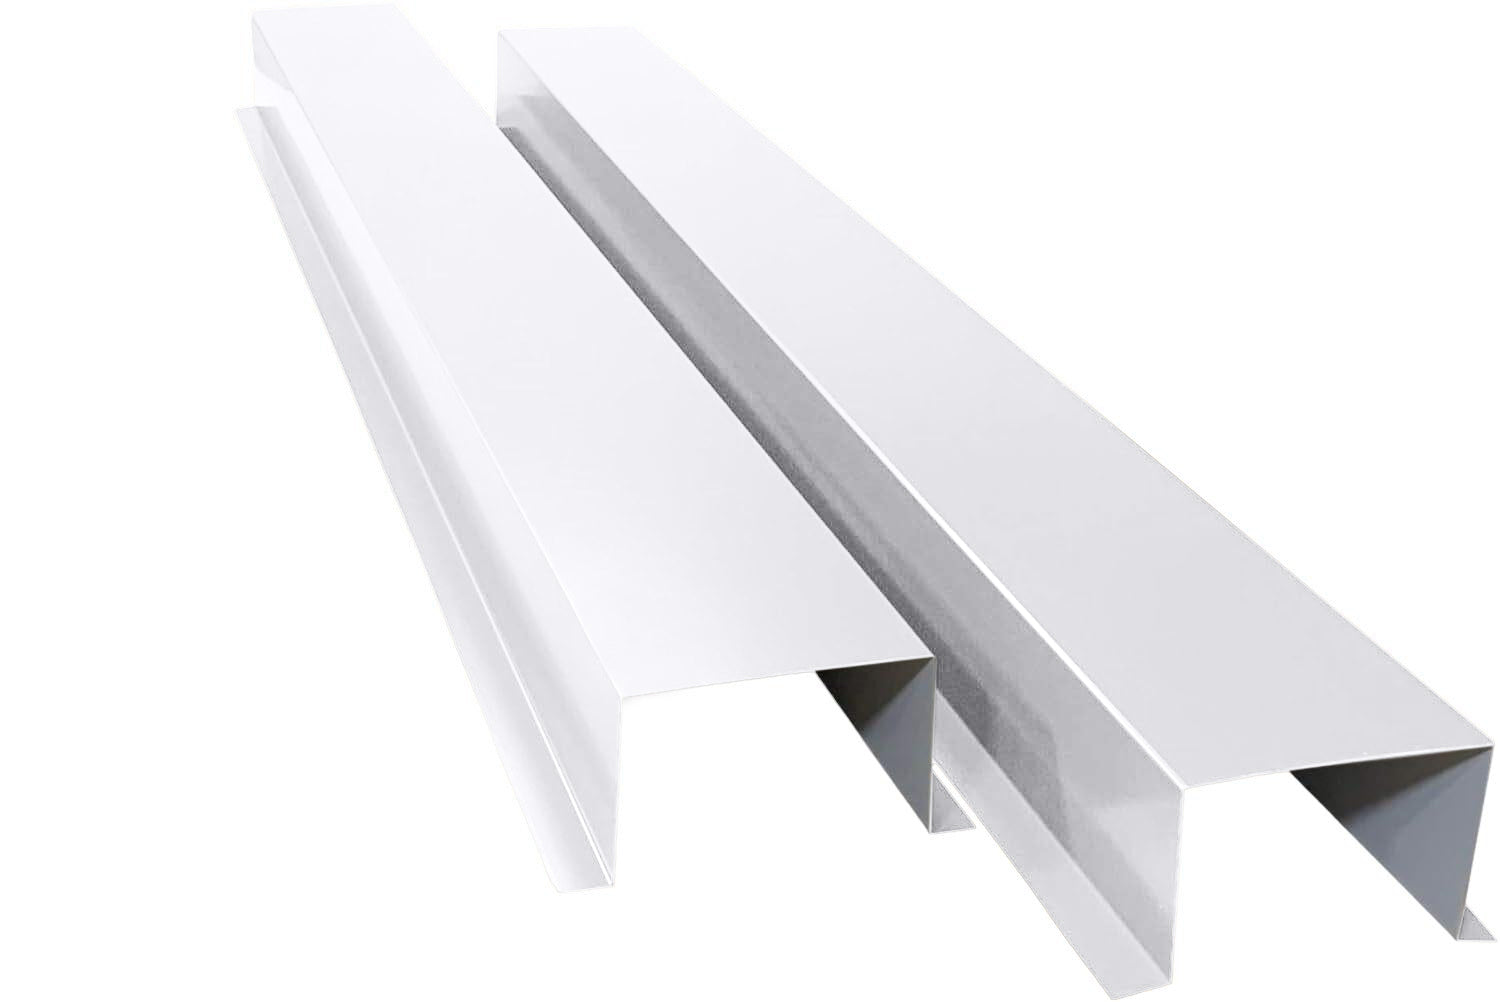 Two pieces of white, L-shaped metal brackets are placed parallel to each other on a white background. Designed for structural support, these Perma Cover Commercial Series - 24 Gauge Painted Metal HVAC Line Set Covers - Heavy Duty, Multiple Sizes & Colors boast a smooth, clean finish suitable for HVAC line protection.